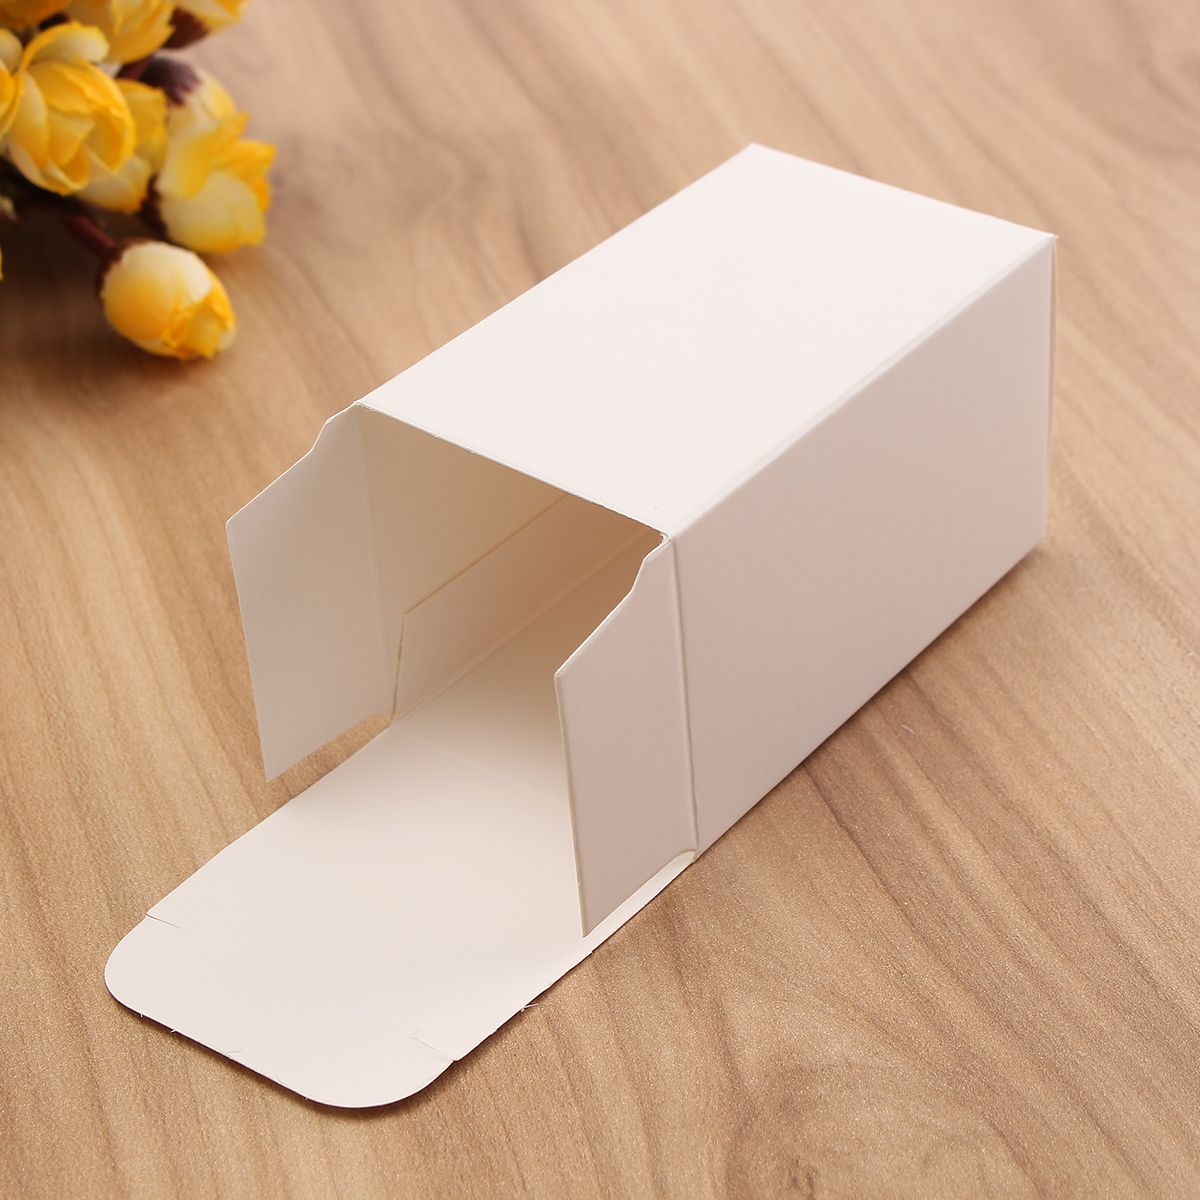 20-Different-Sizes-White-Cardboard-Postal-Box-Storage-Carton-for-Gifs-Crafting-Packaging-Mailing-1184848